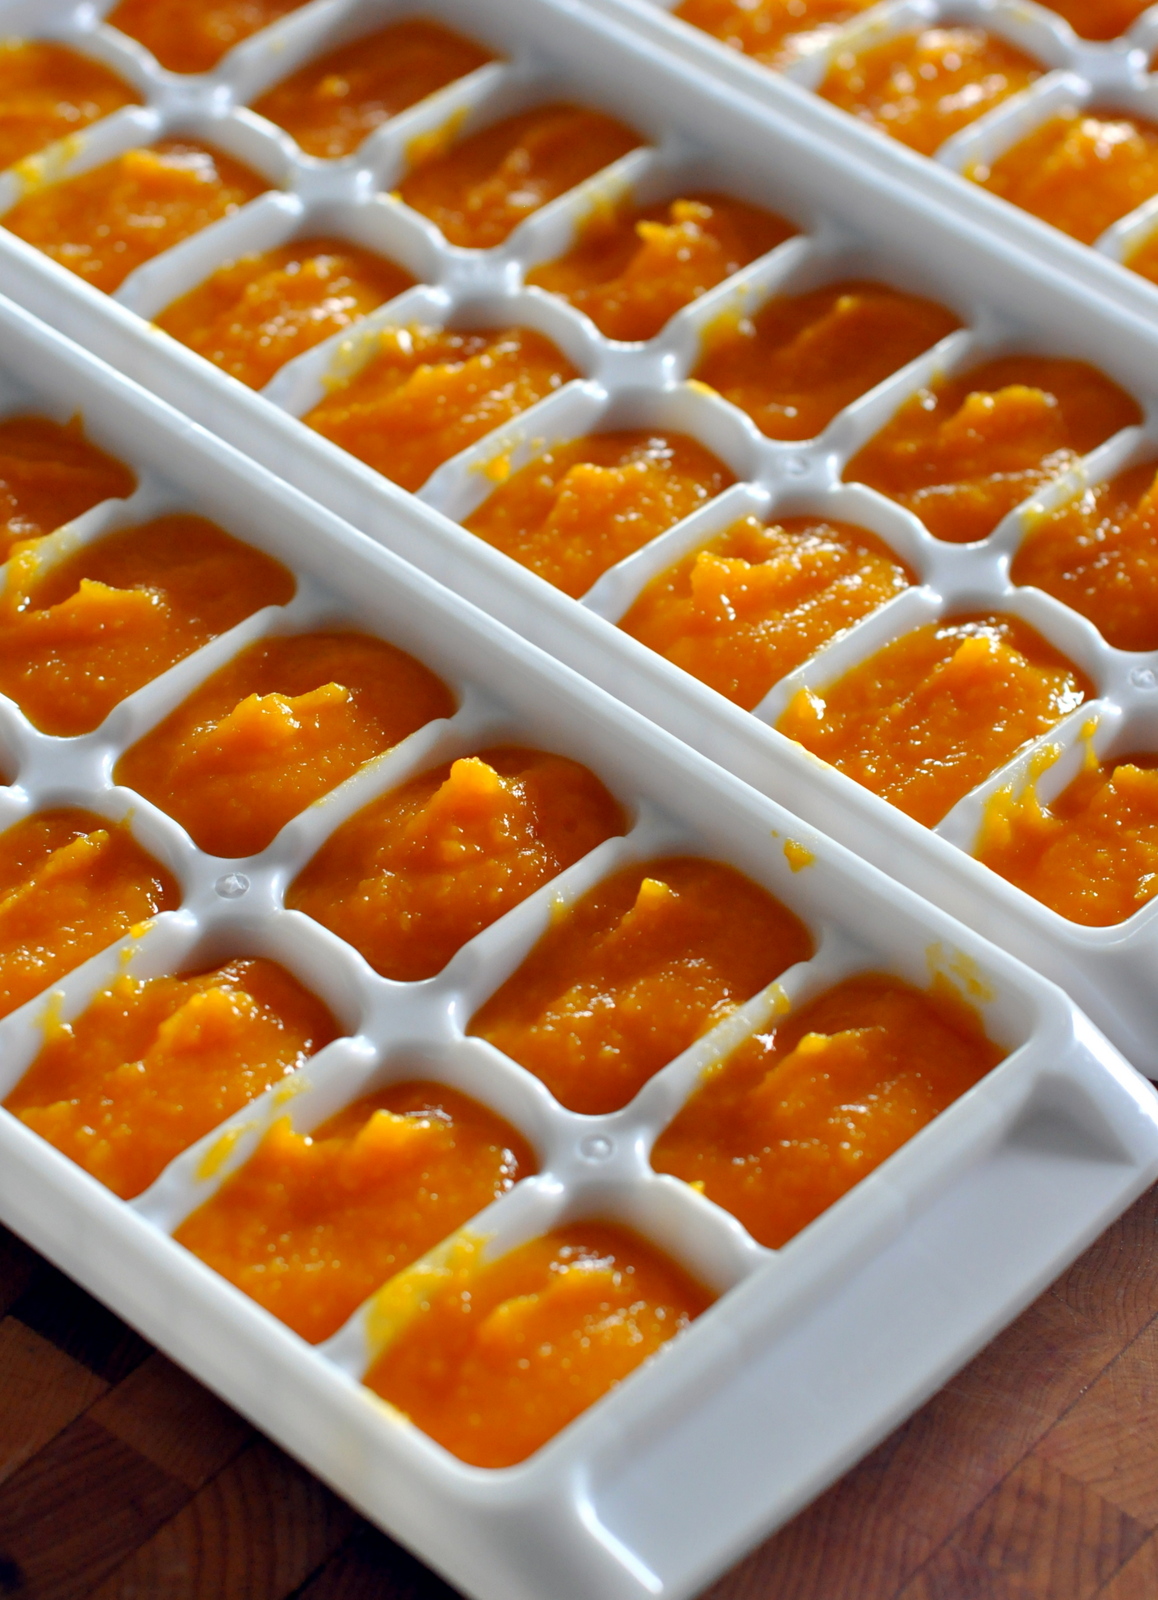 How To: Make and Freeze Homemade Baby Food {Butternut Squash Purée} | Taste As You Go